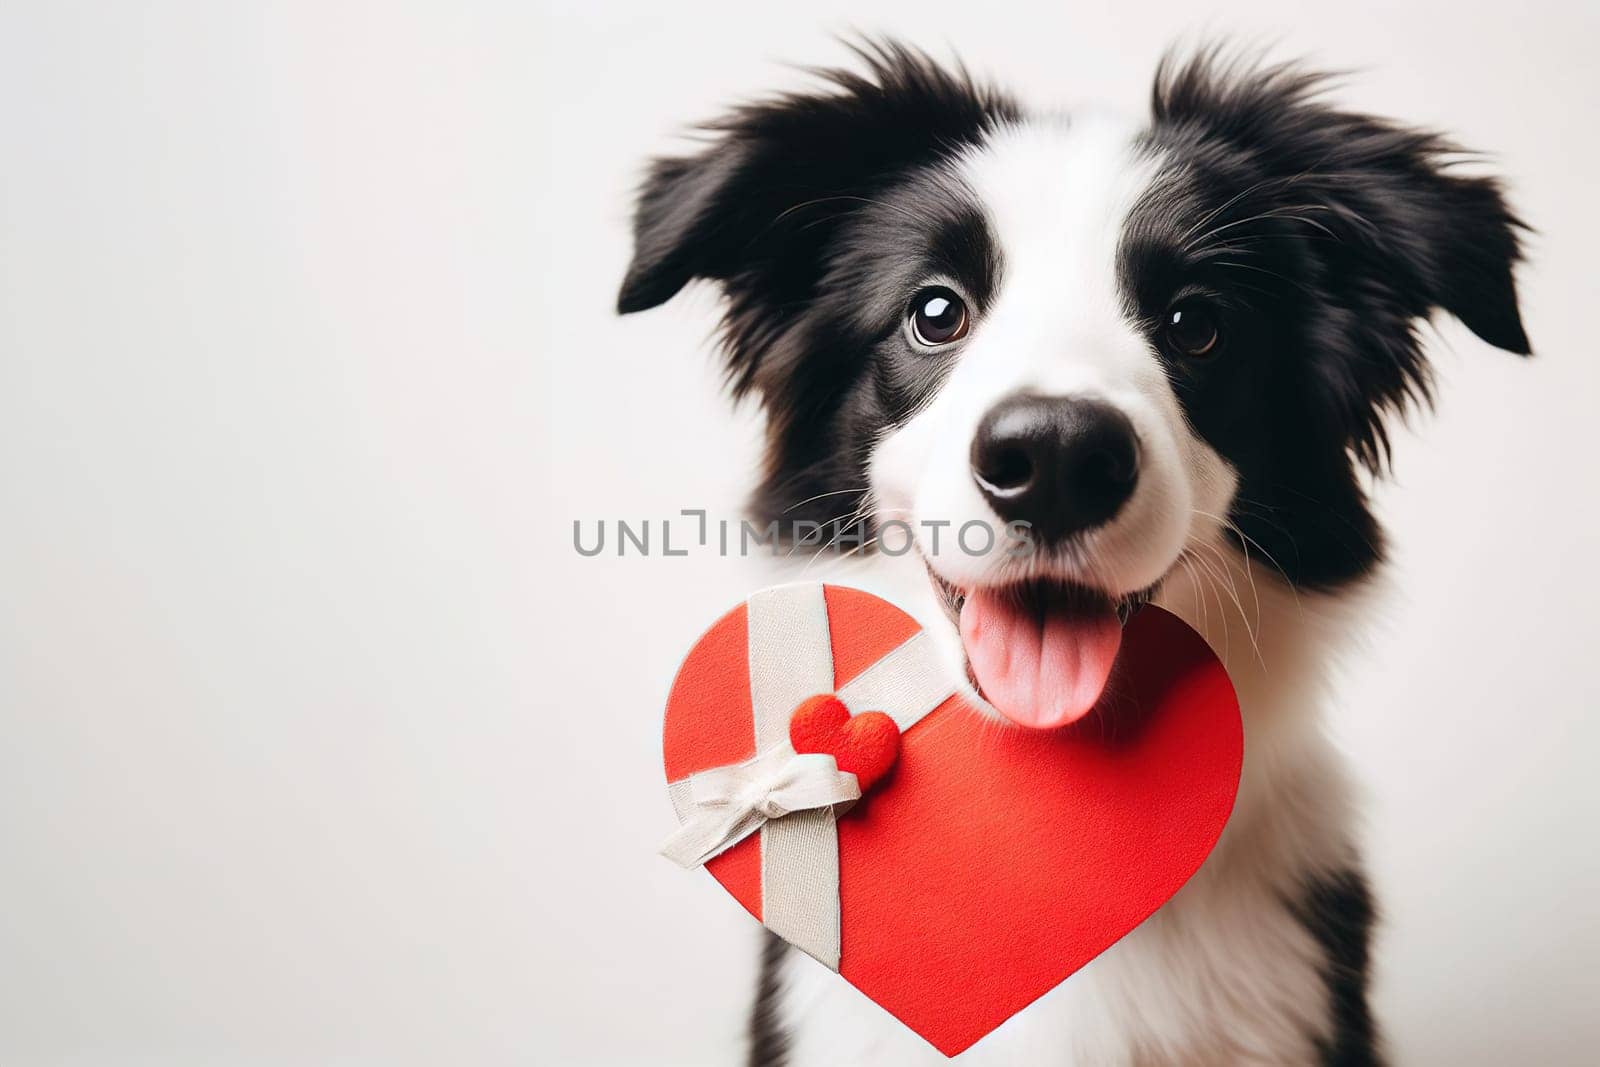 Cute portrait dog sitting and looking at camera with red heart in its mouth by EkaterinaPereslavtseva